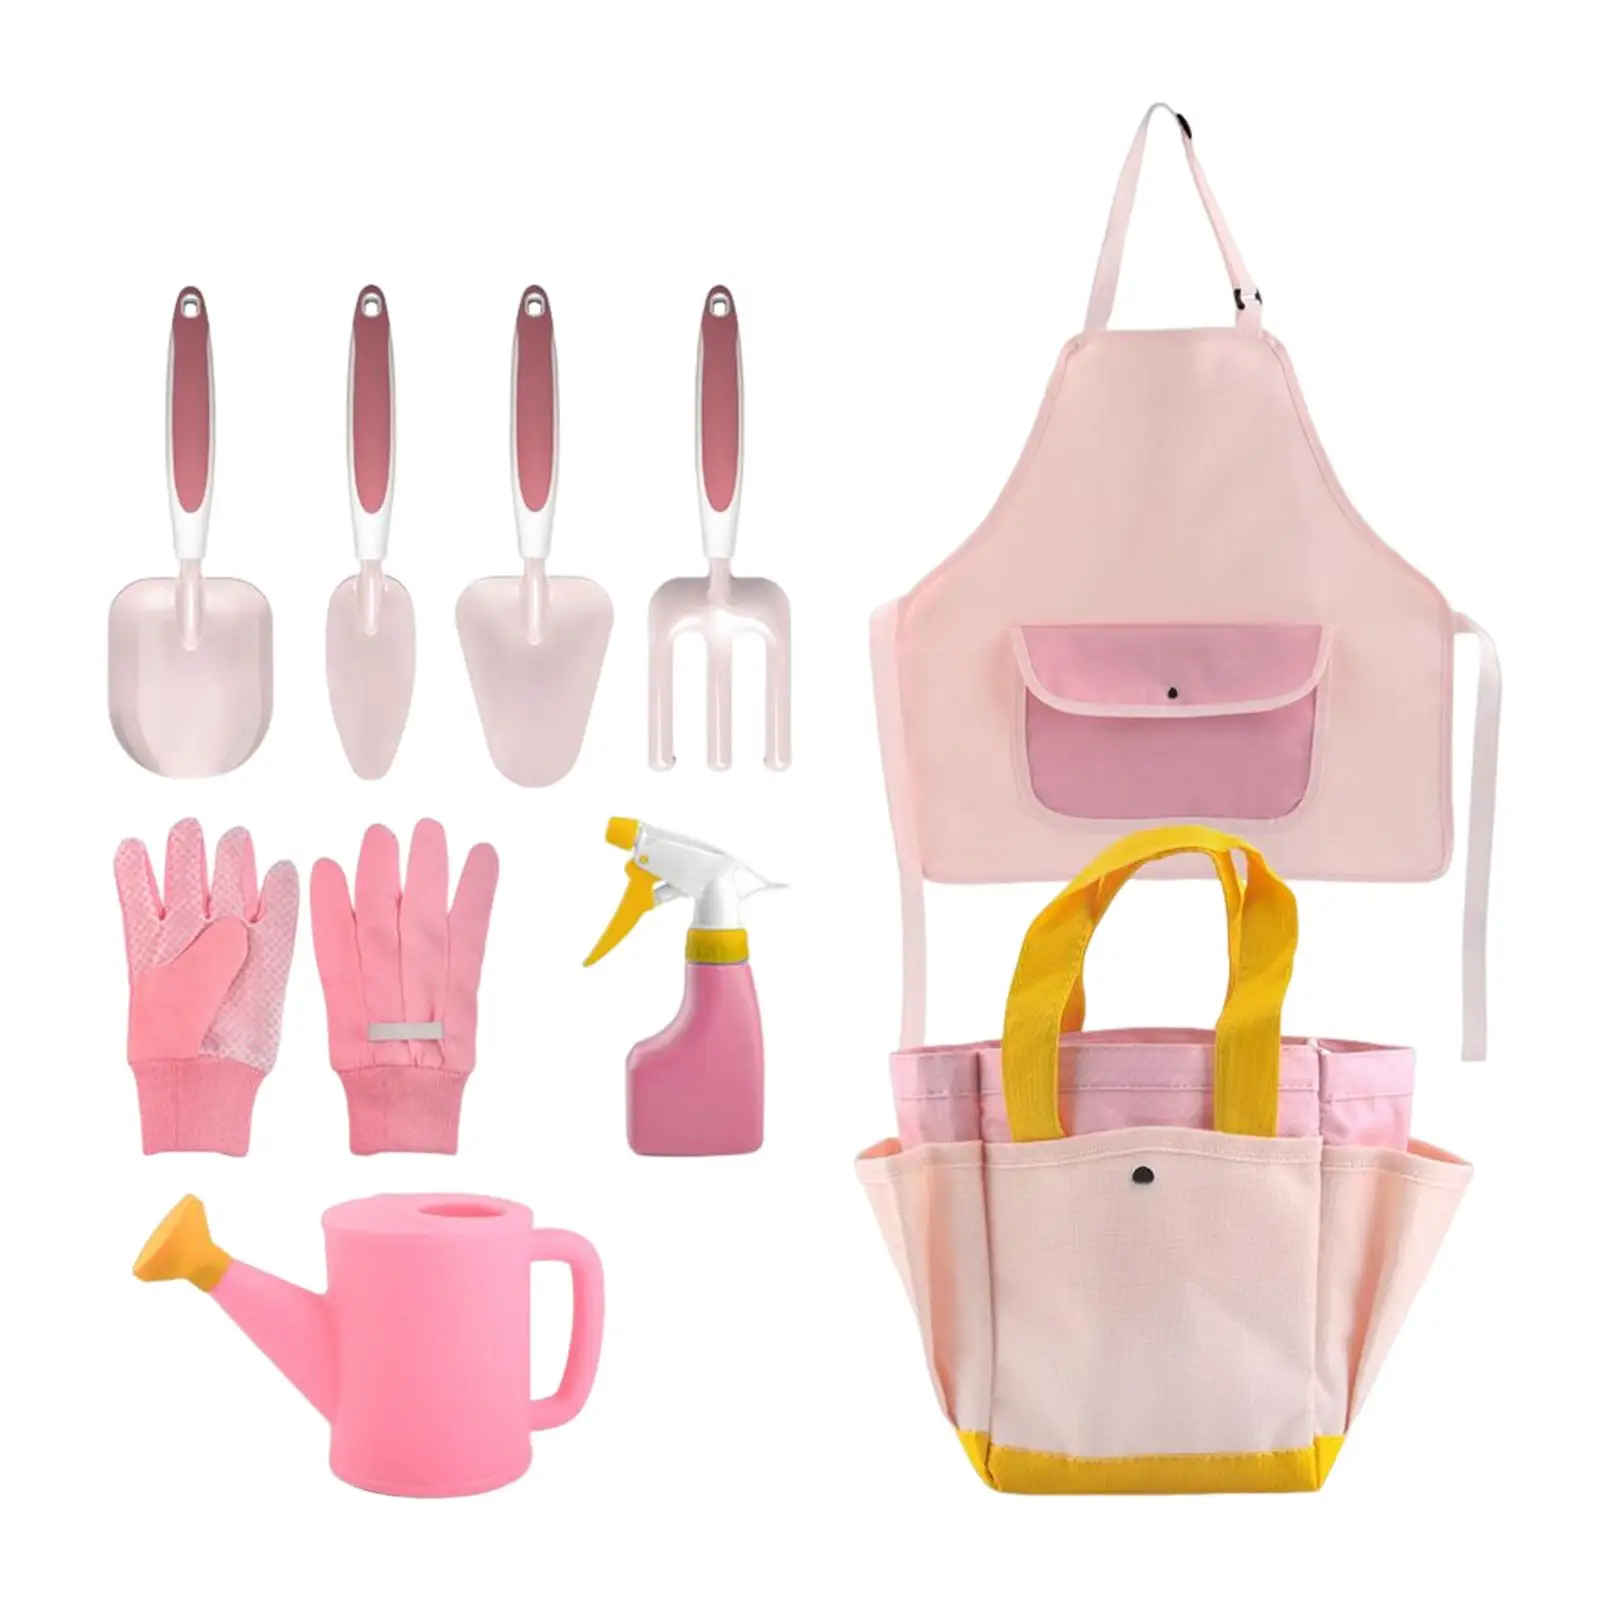 Kids Educational Gardening Tool Set Pink Convenient Accessories Compact Size